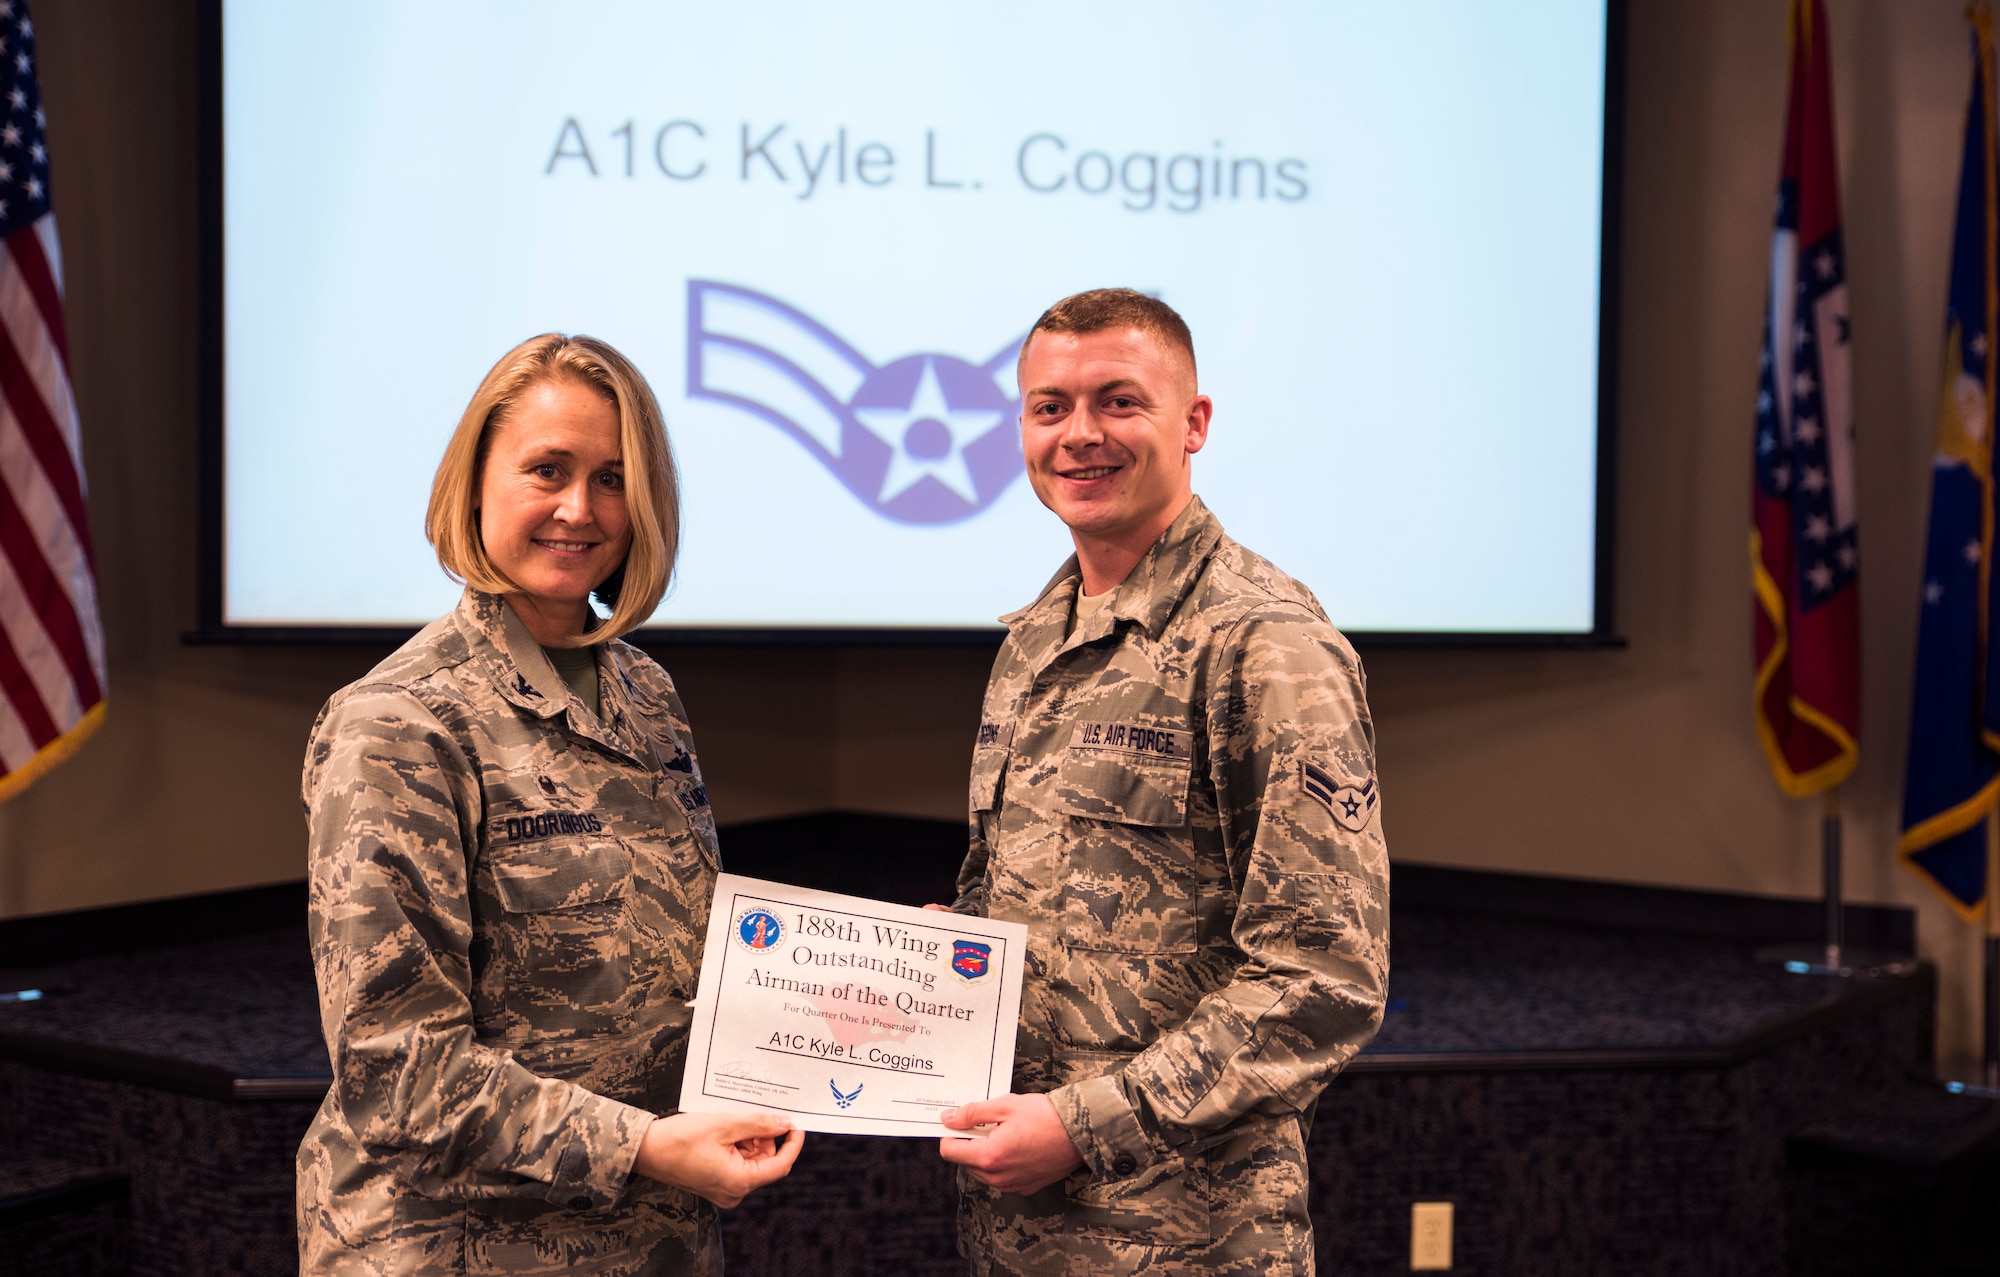 Airman 1st Class Kyle Coggins, 184th Attack Squadron knowledge operations manager, accepts the Outstanding Airman of the Quarter award from Col. Bobbi Doorenbos, 188th Wing commander, Feb. 20, 2016, during a commander’s call at Ebbing Air National Guard Base, Fort Smith, Ark. The Outstanding Airman of the Quarter award is given to Airmen that have provided exceptional service to the wing throughout the last quarter and distinguished themselves among the best in the 188th. Winners were selected in the Airman, Noncomissioned Officer, Senior NCO, Company Grade Officer and Field Grade Officer categories. (U.S. Air National Guard photo by Senior Airman Cody Martin/Released)